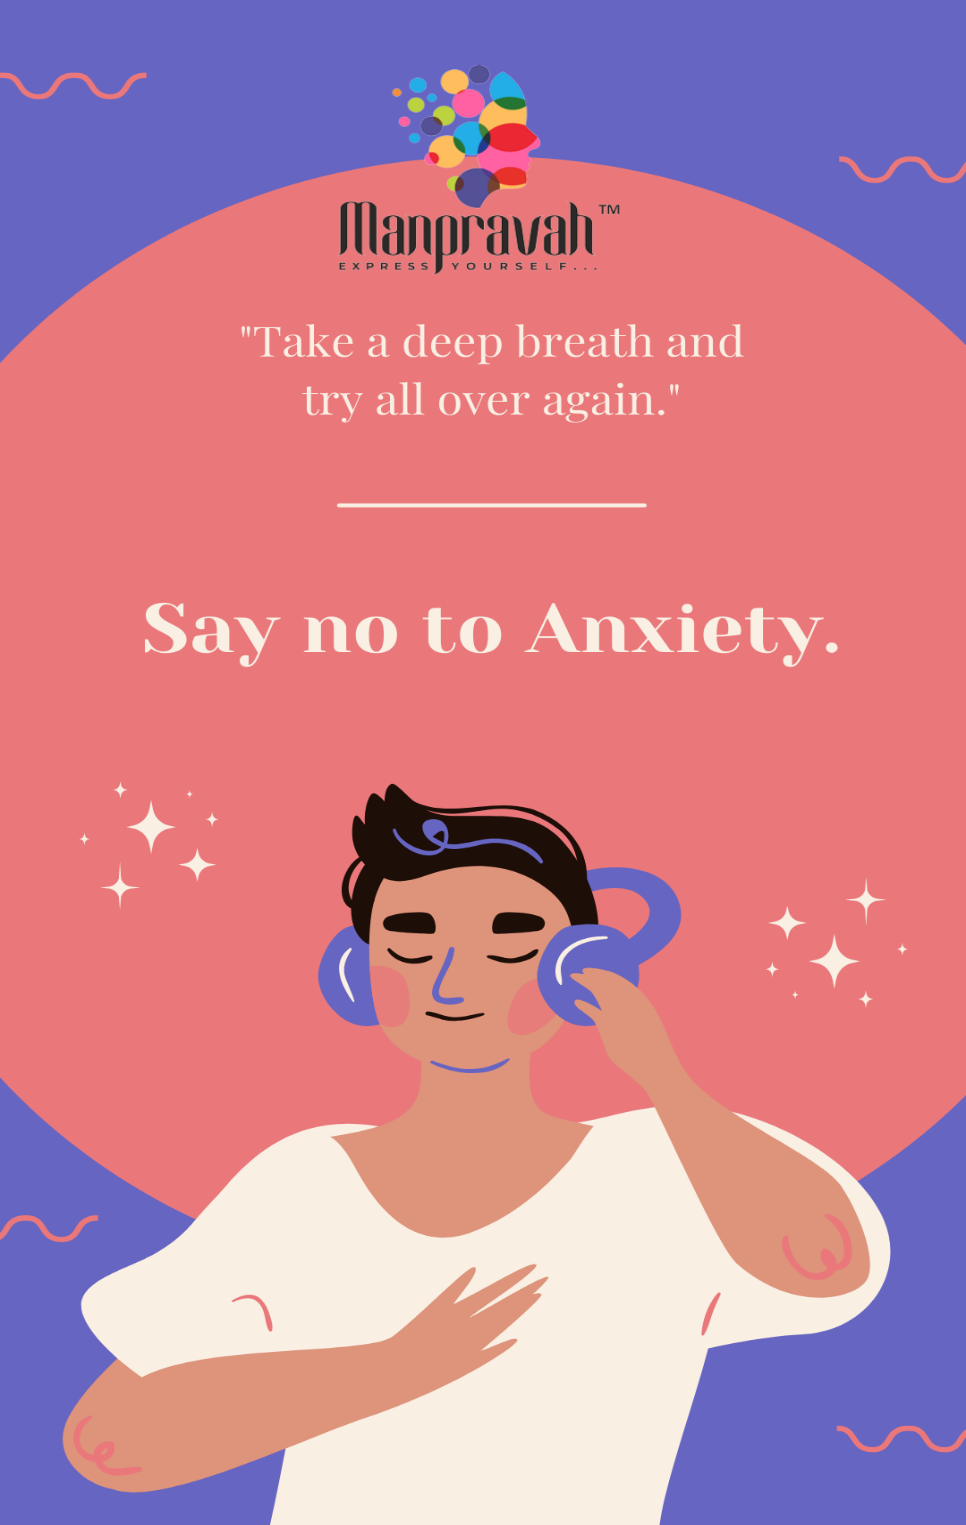 Post gyldige salami Tools & Techniques to Overcome Anxiety | Manpravah Clinic